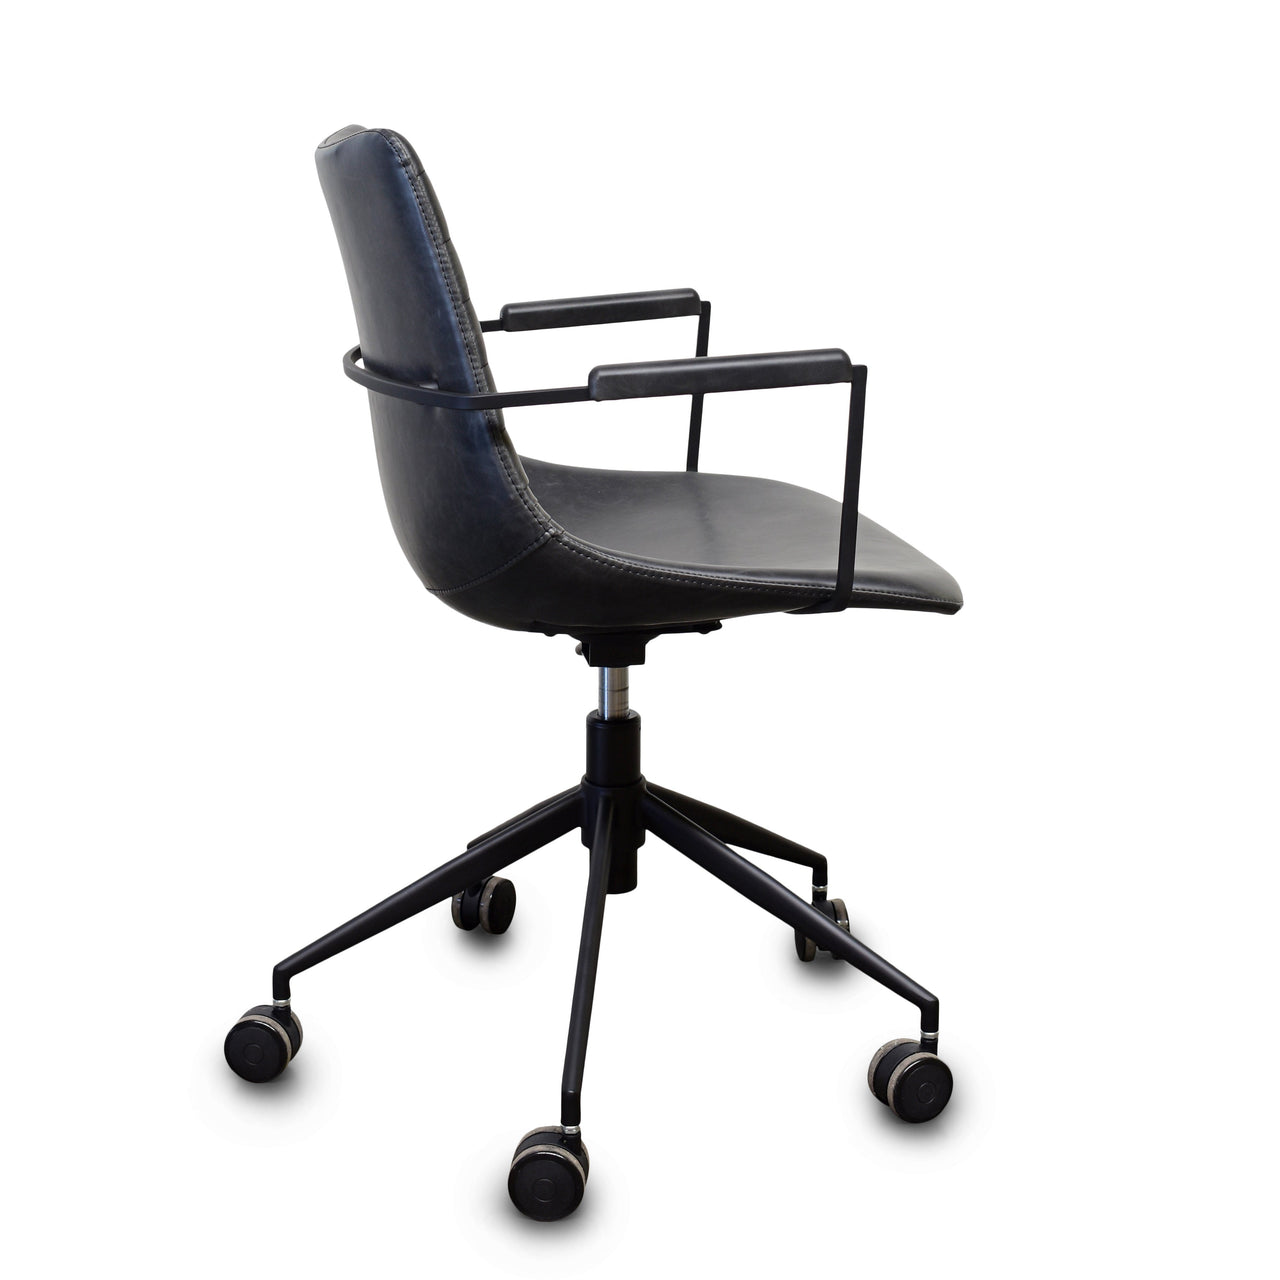 Toby Office Chair, Black PU Leather Office Chair Gingko 